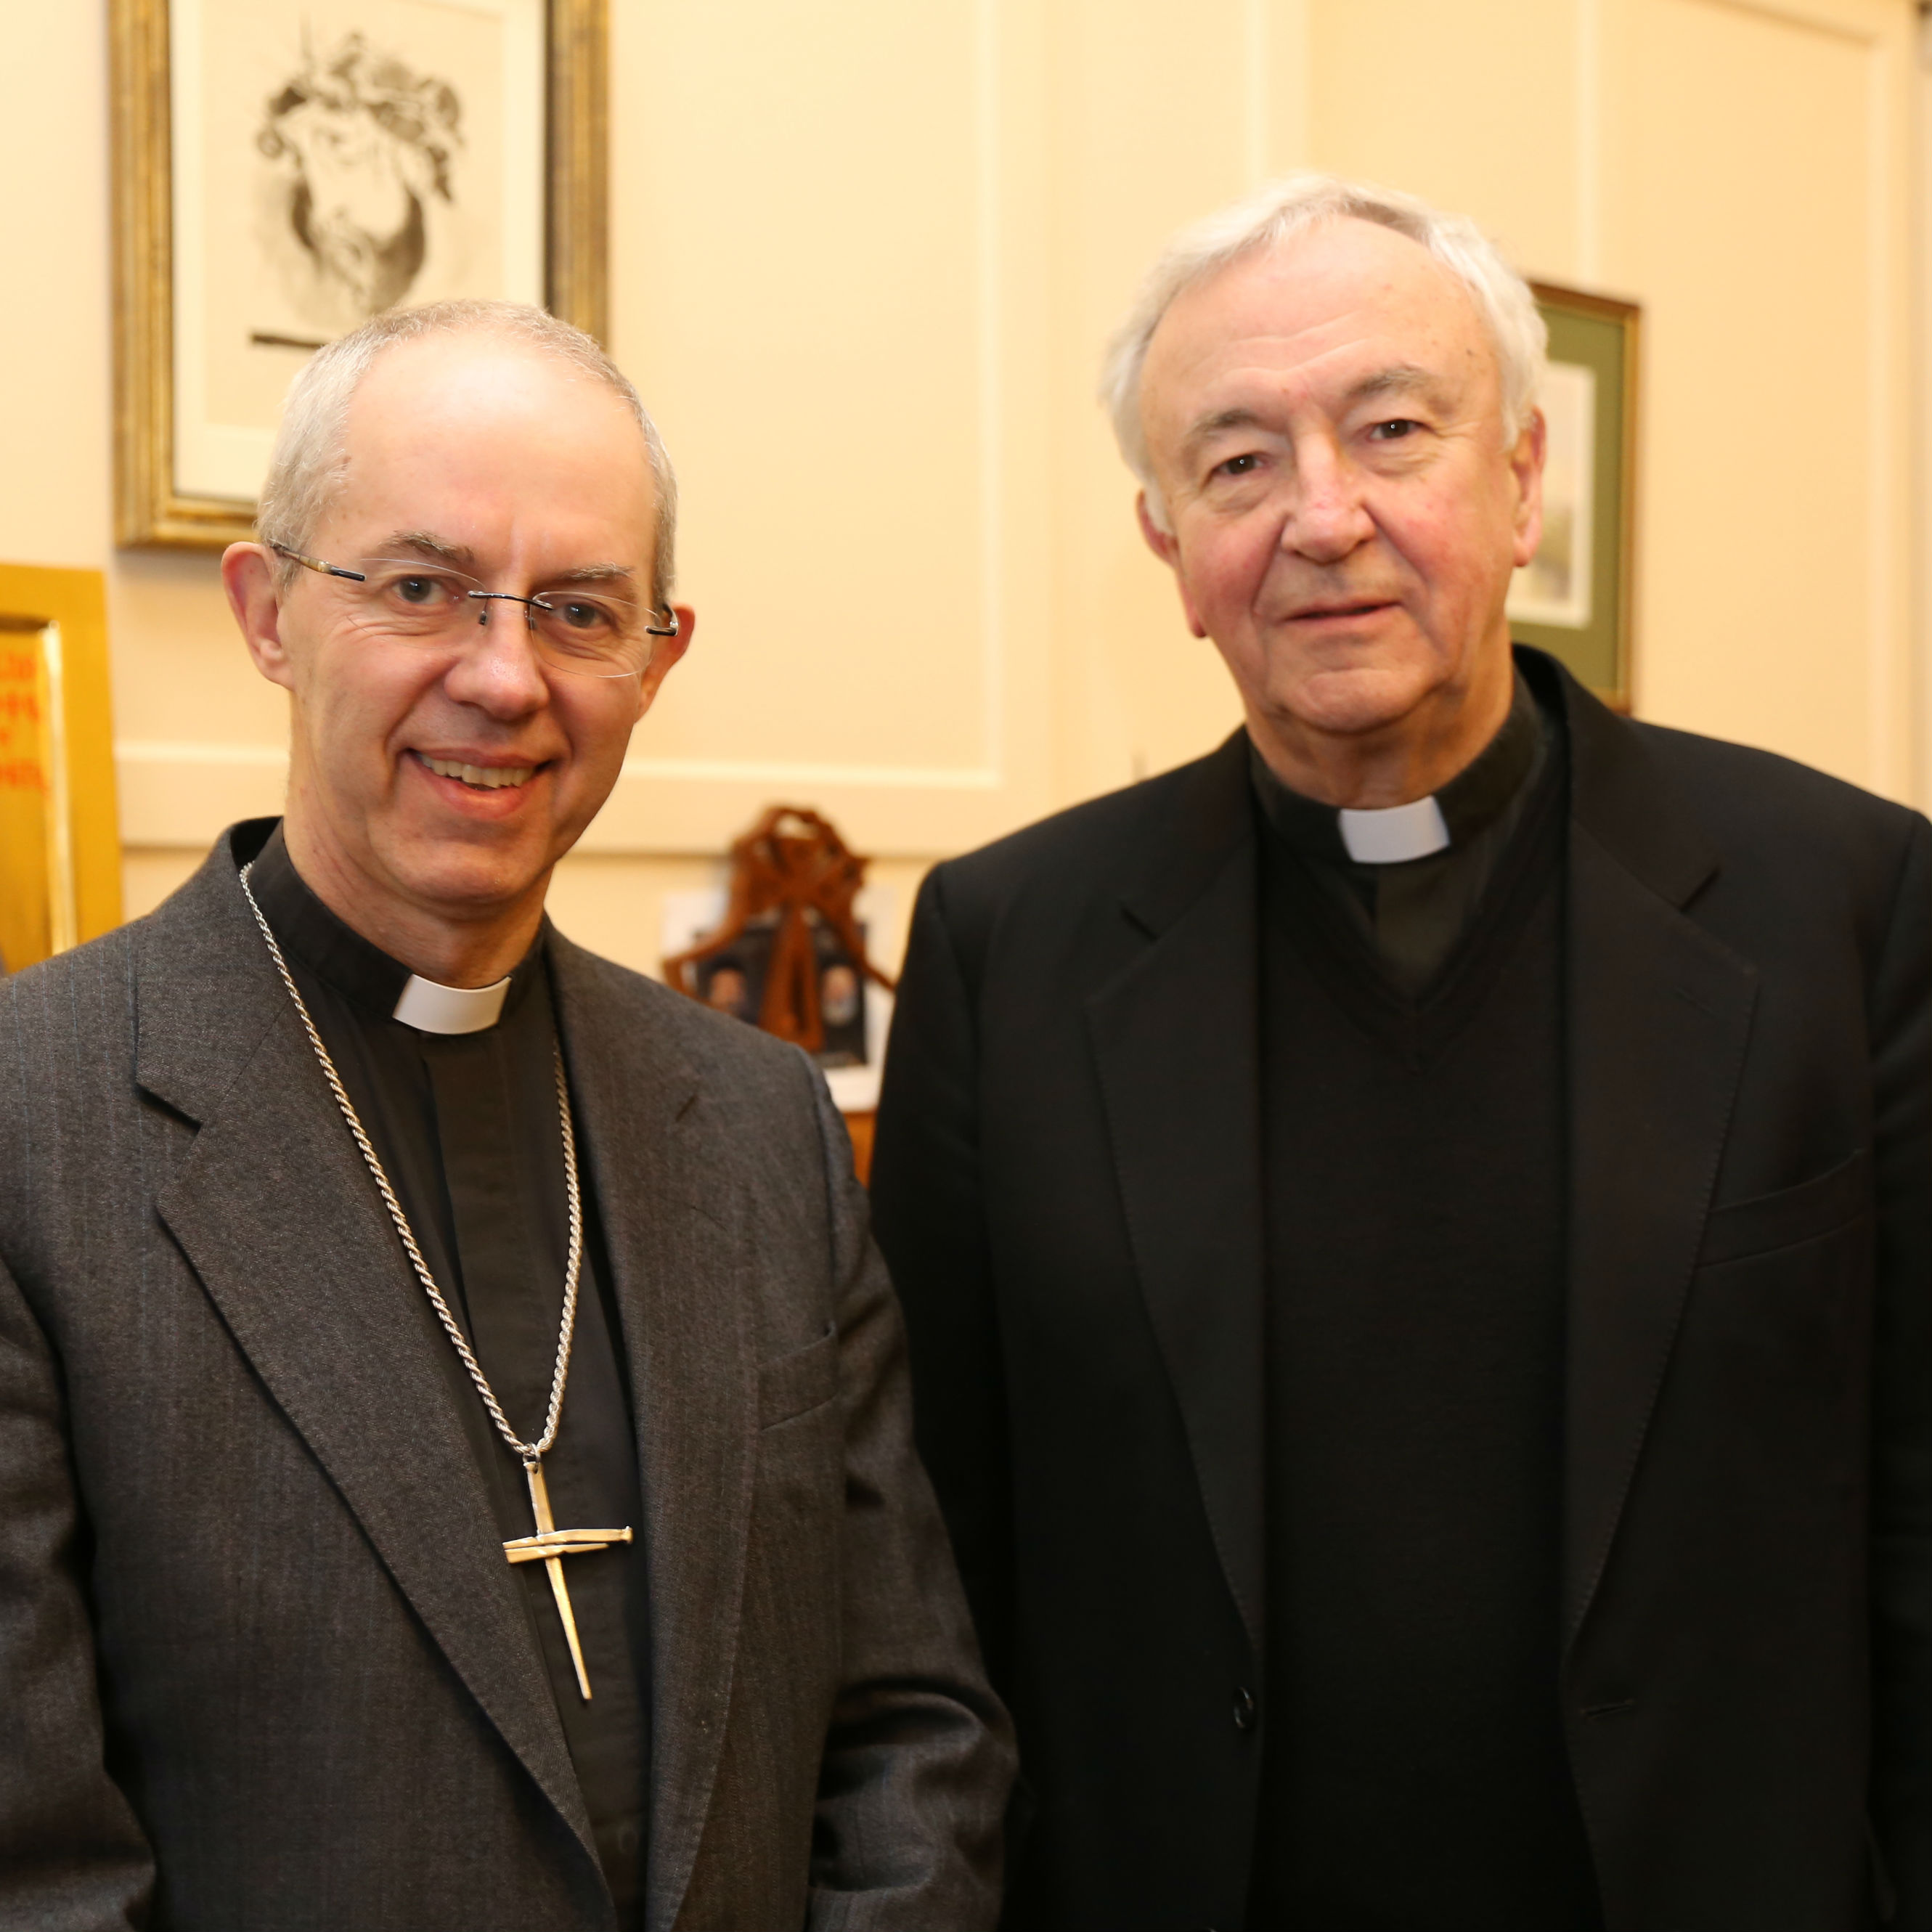 Christian unity is paramount in a divided world, says Archbishop Welby